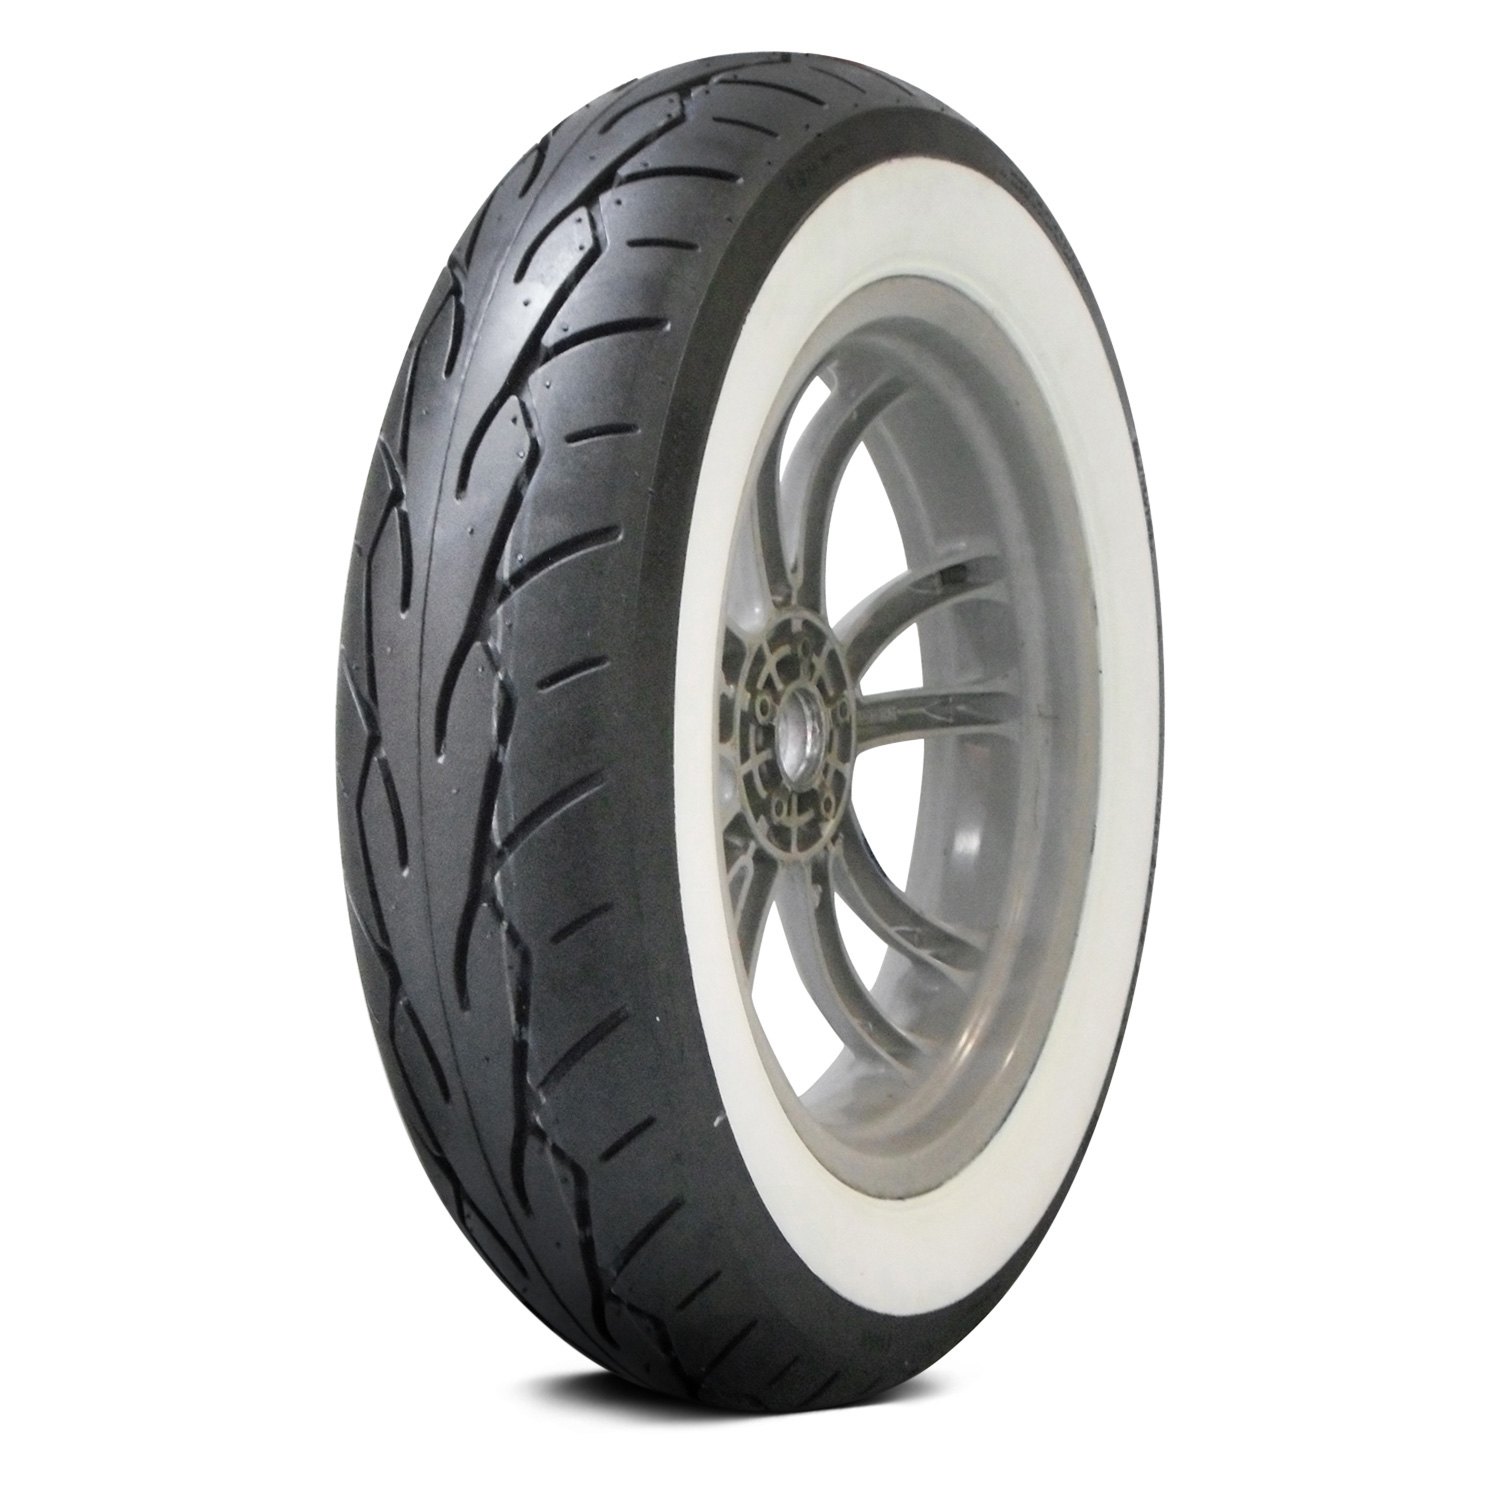 Vee Rubber® W30204 VRM302 White Wall Tire